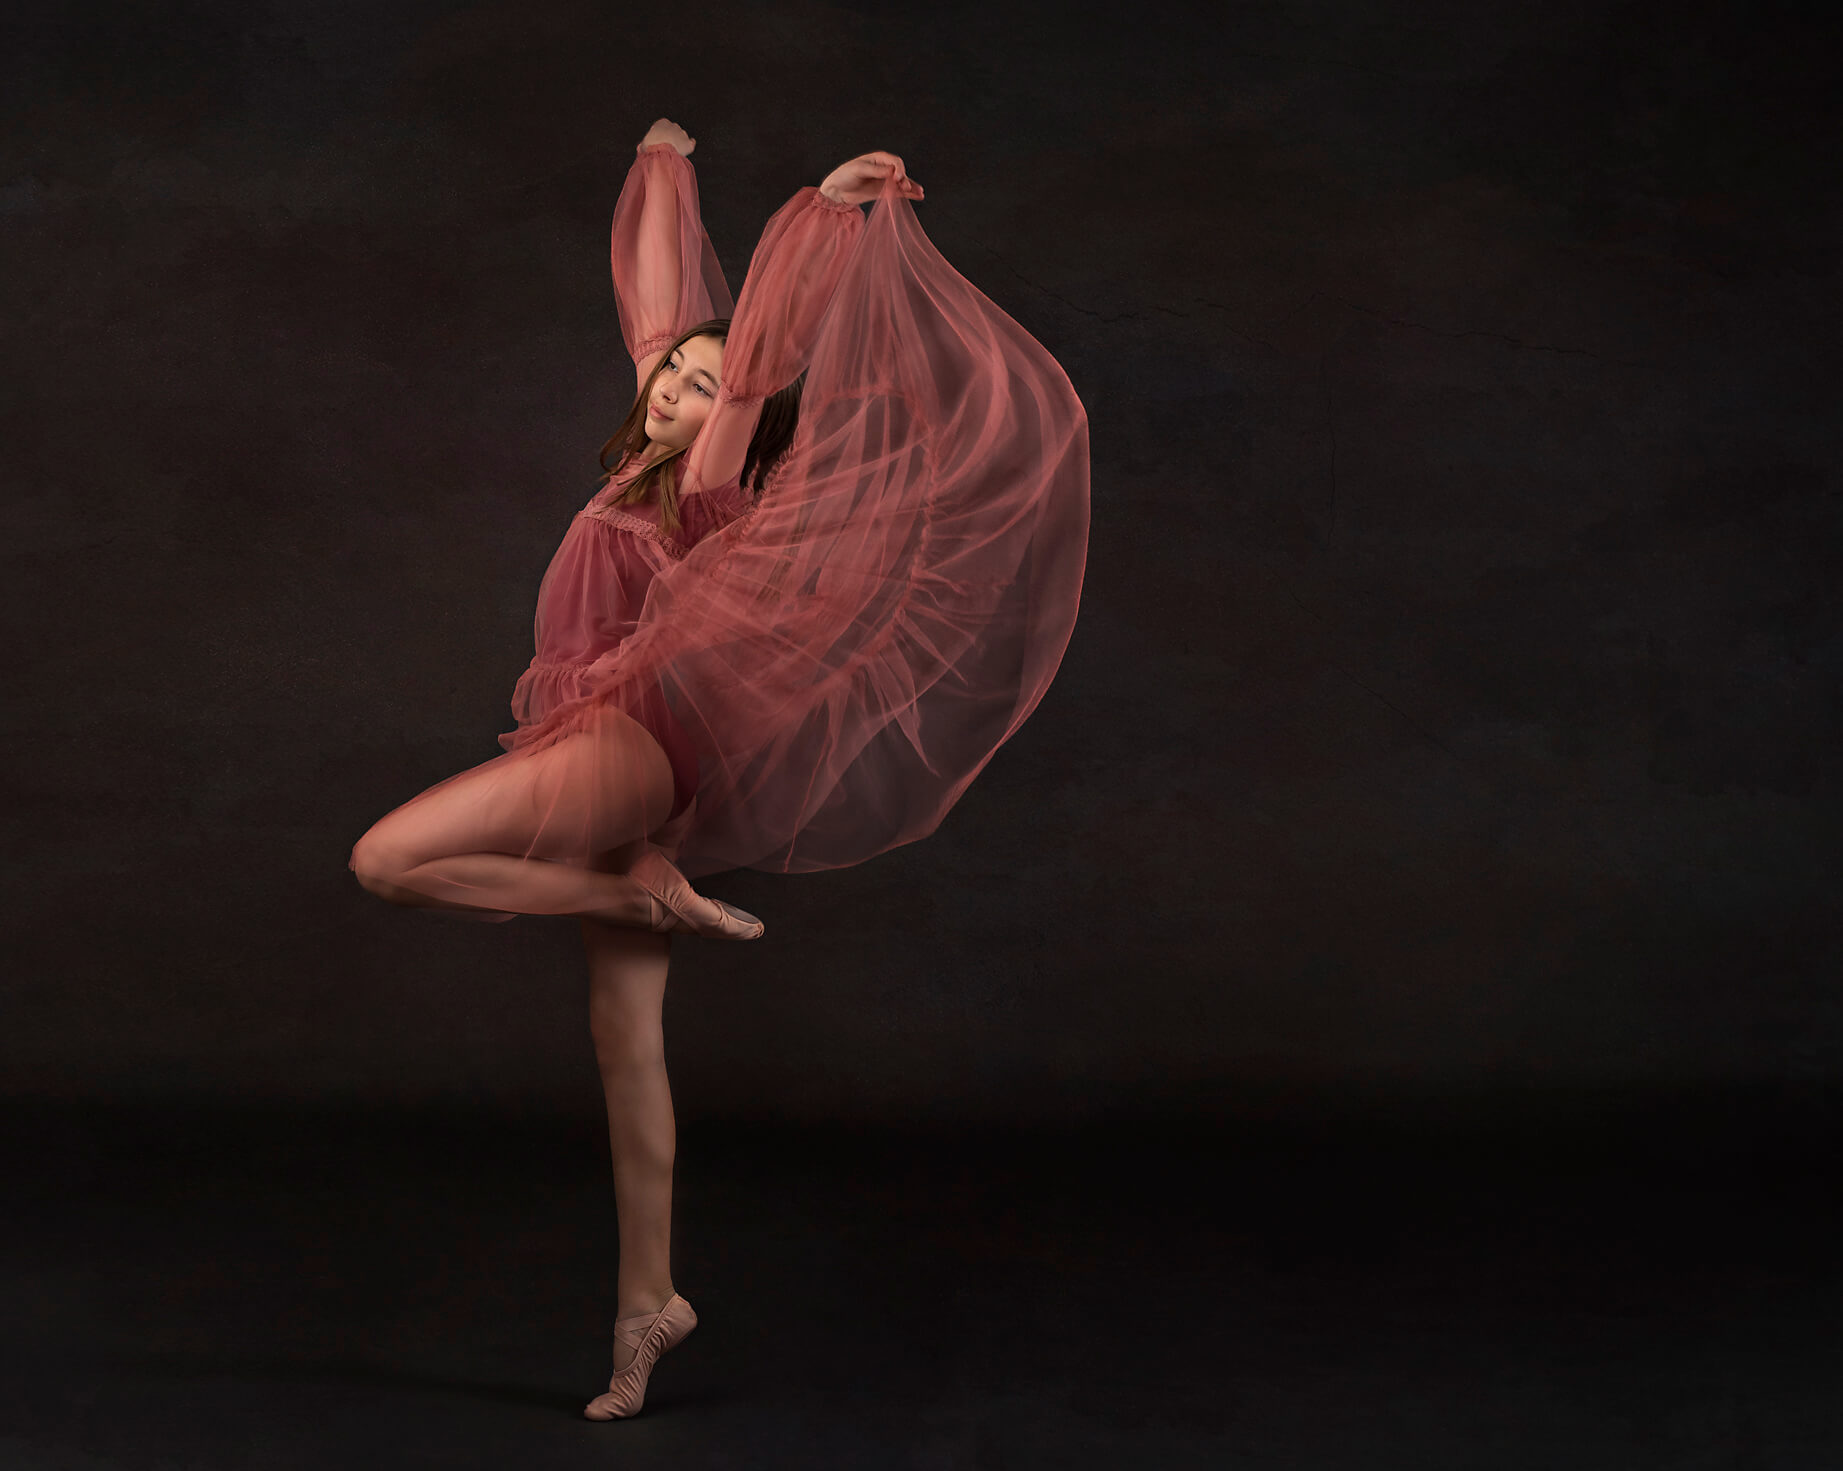 Young girl in ballet shoes and pink dance dress